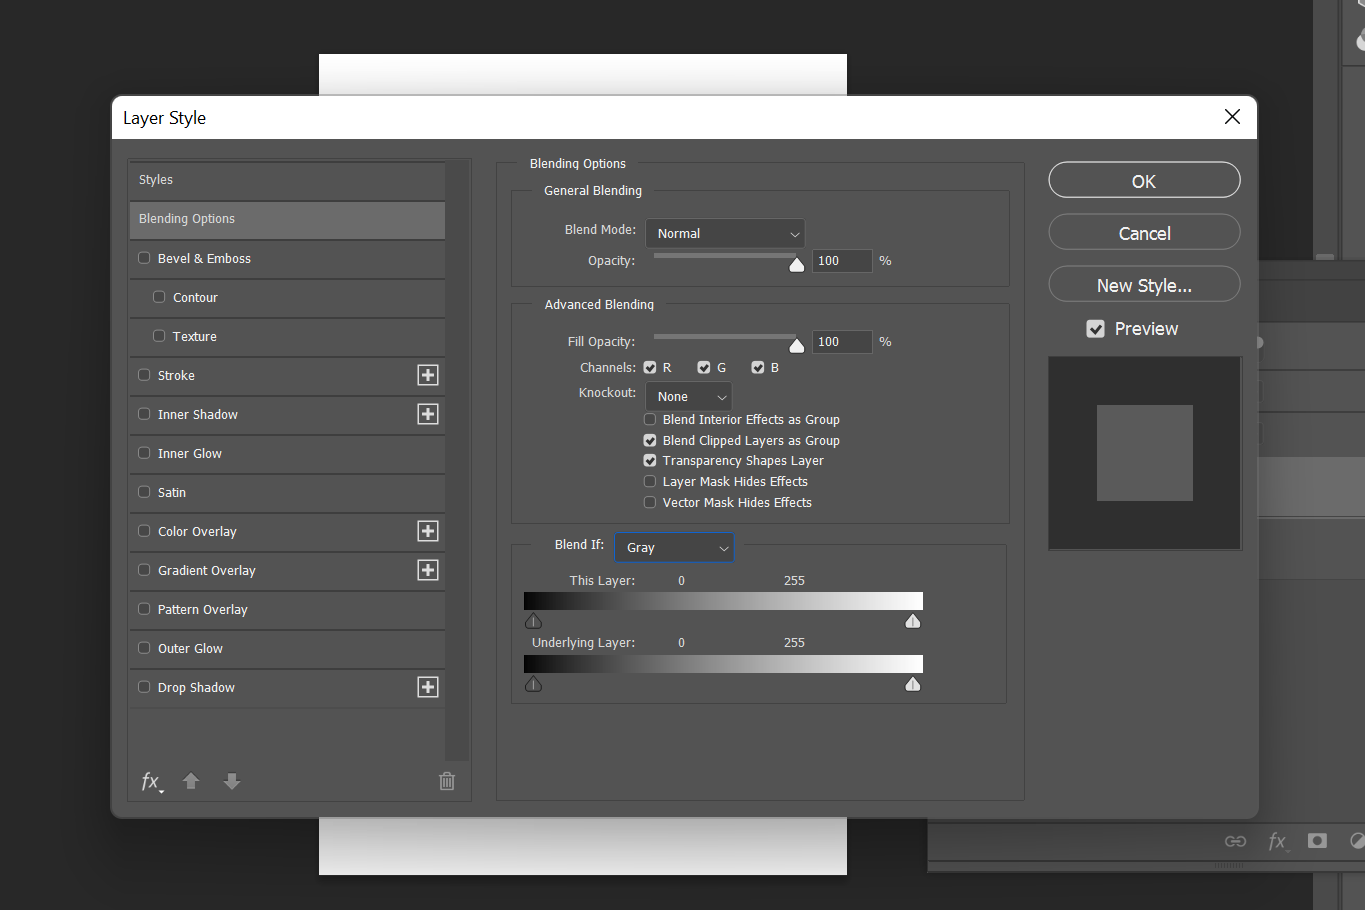 The Layer Style Window in Photoshop.